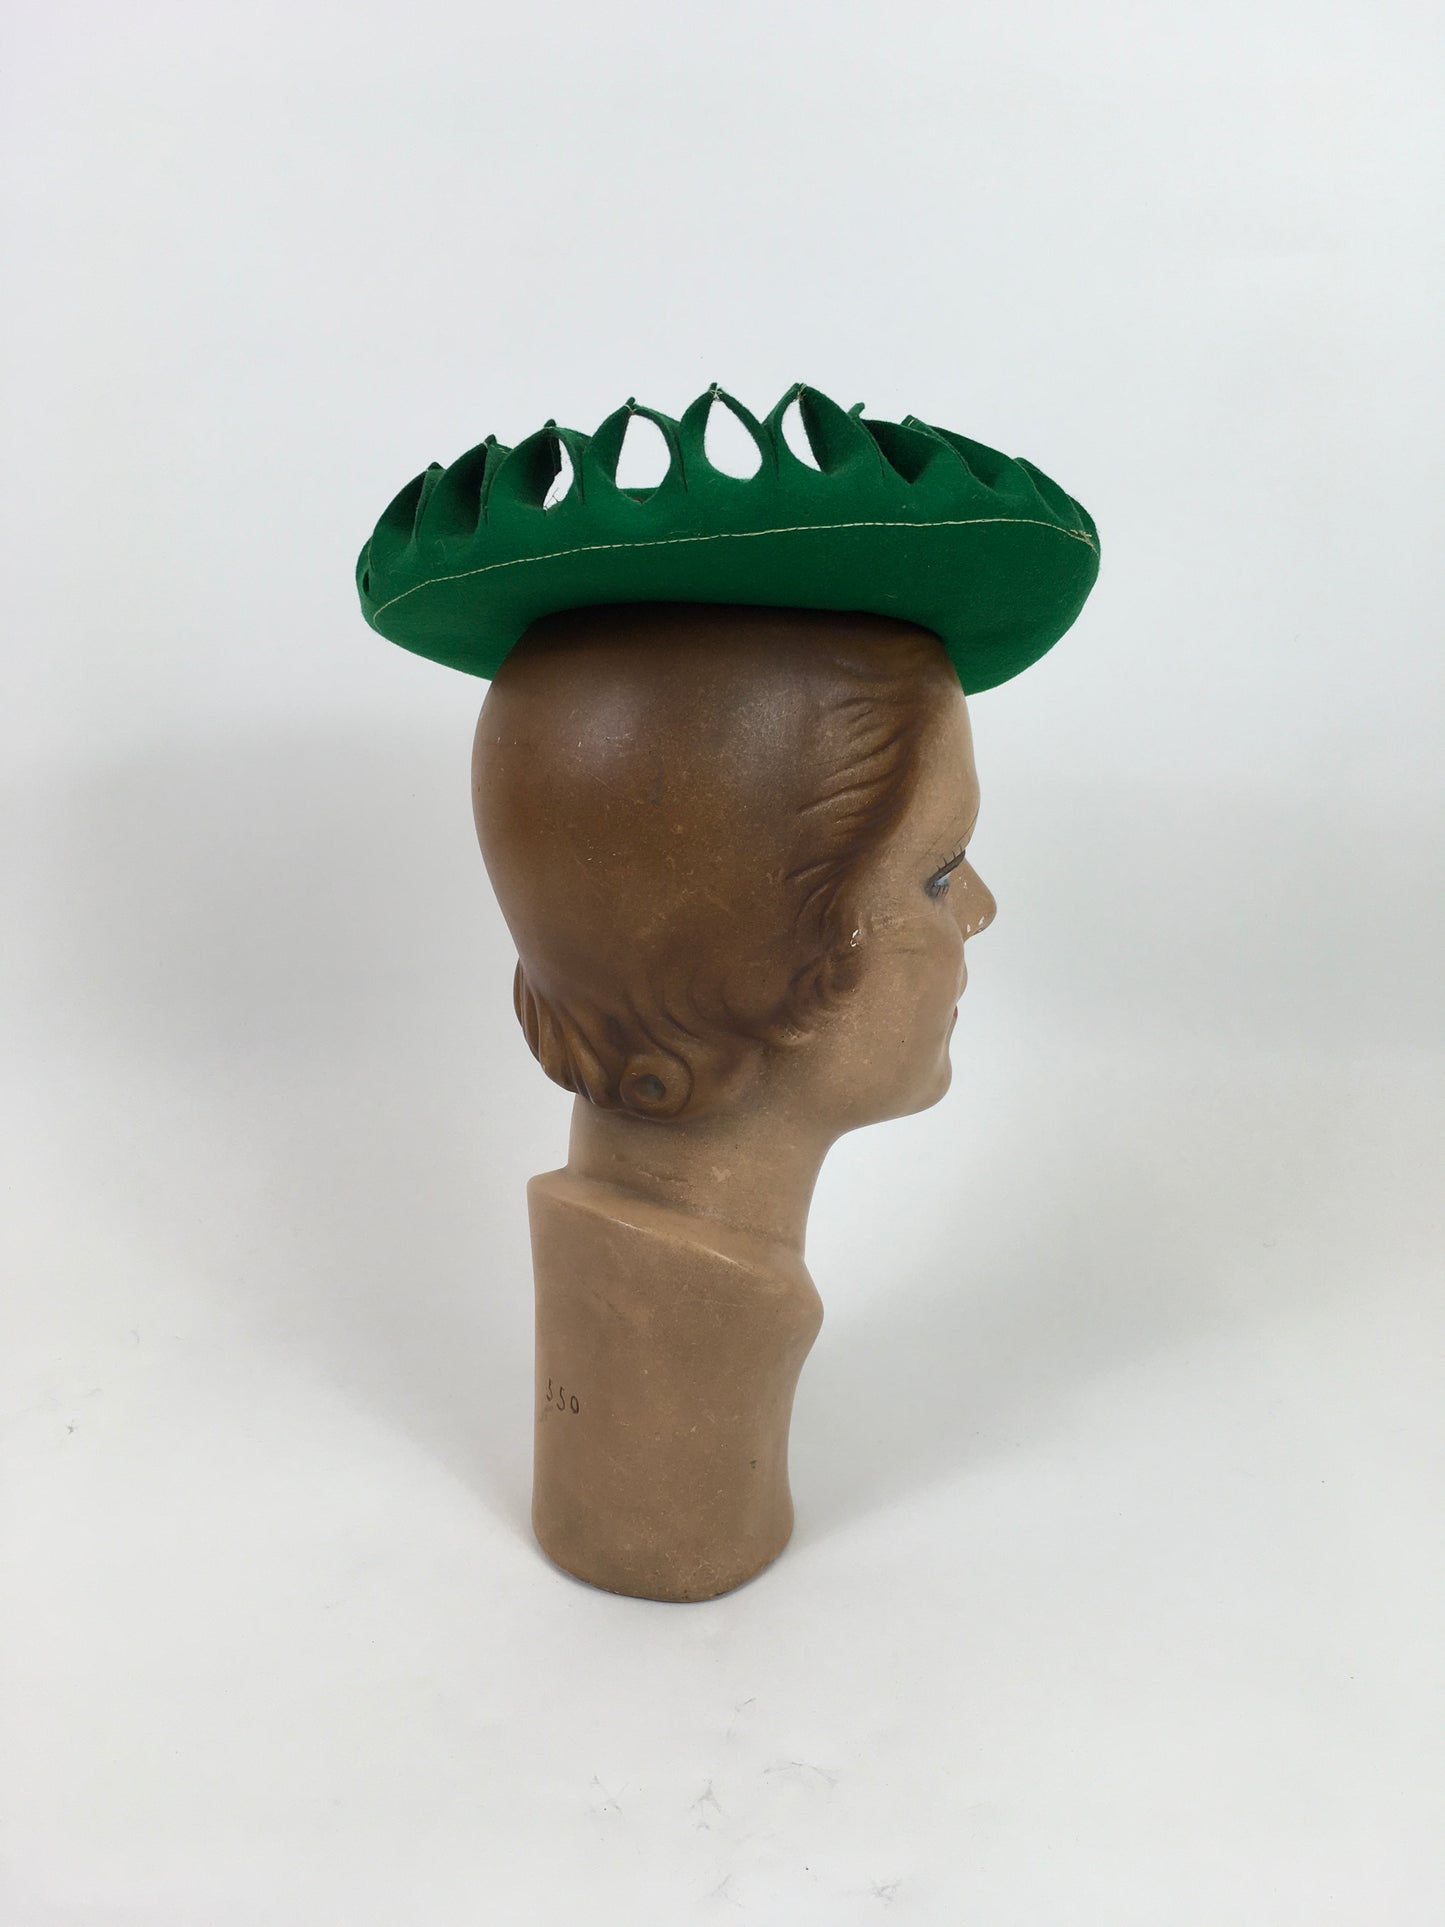 Original 1940’s SENSATIONAL Bottle Green Pancake Hat - With Cutwork and Multi Colour Veiling